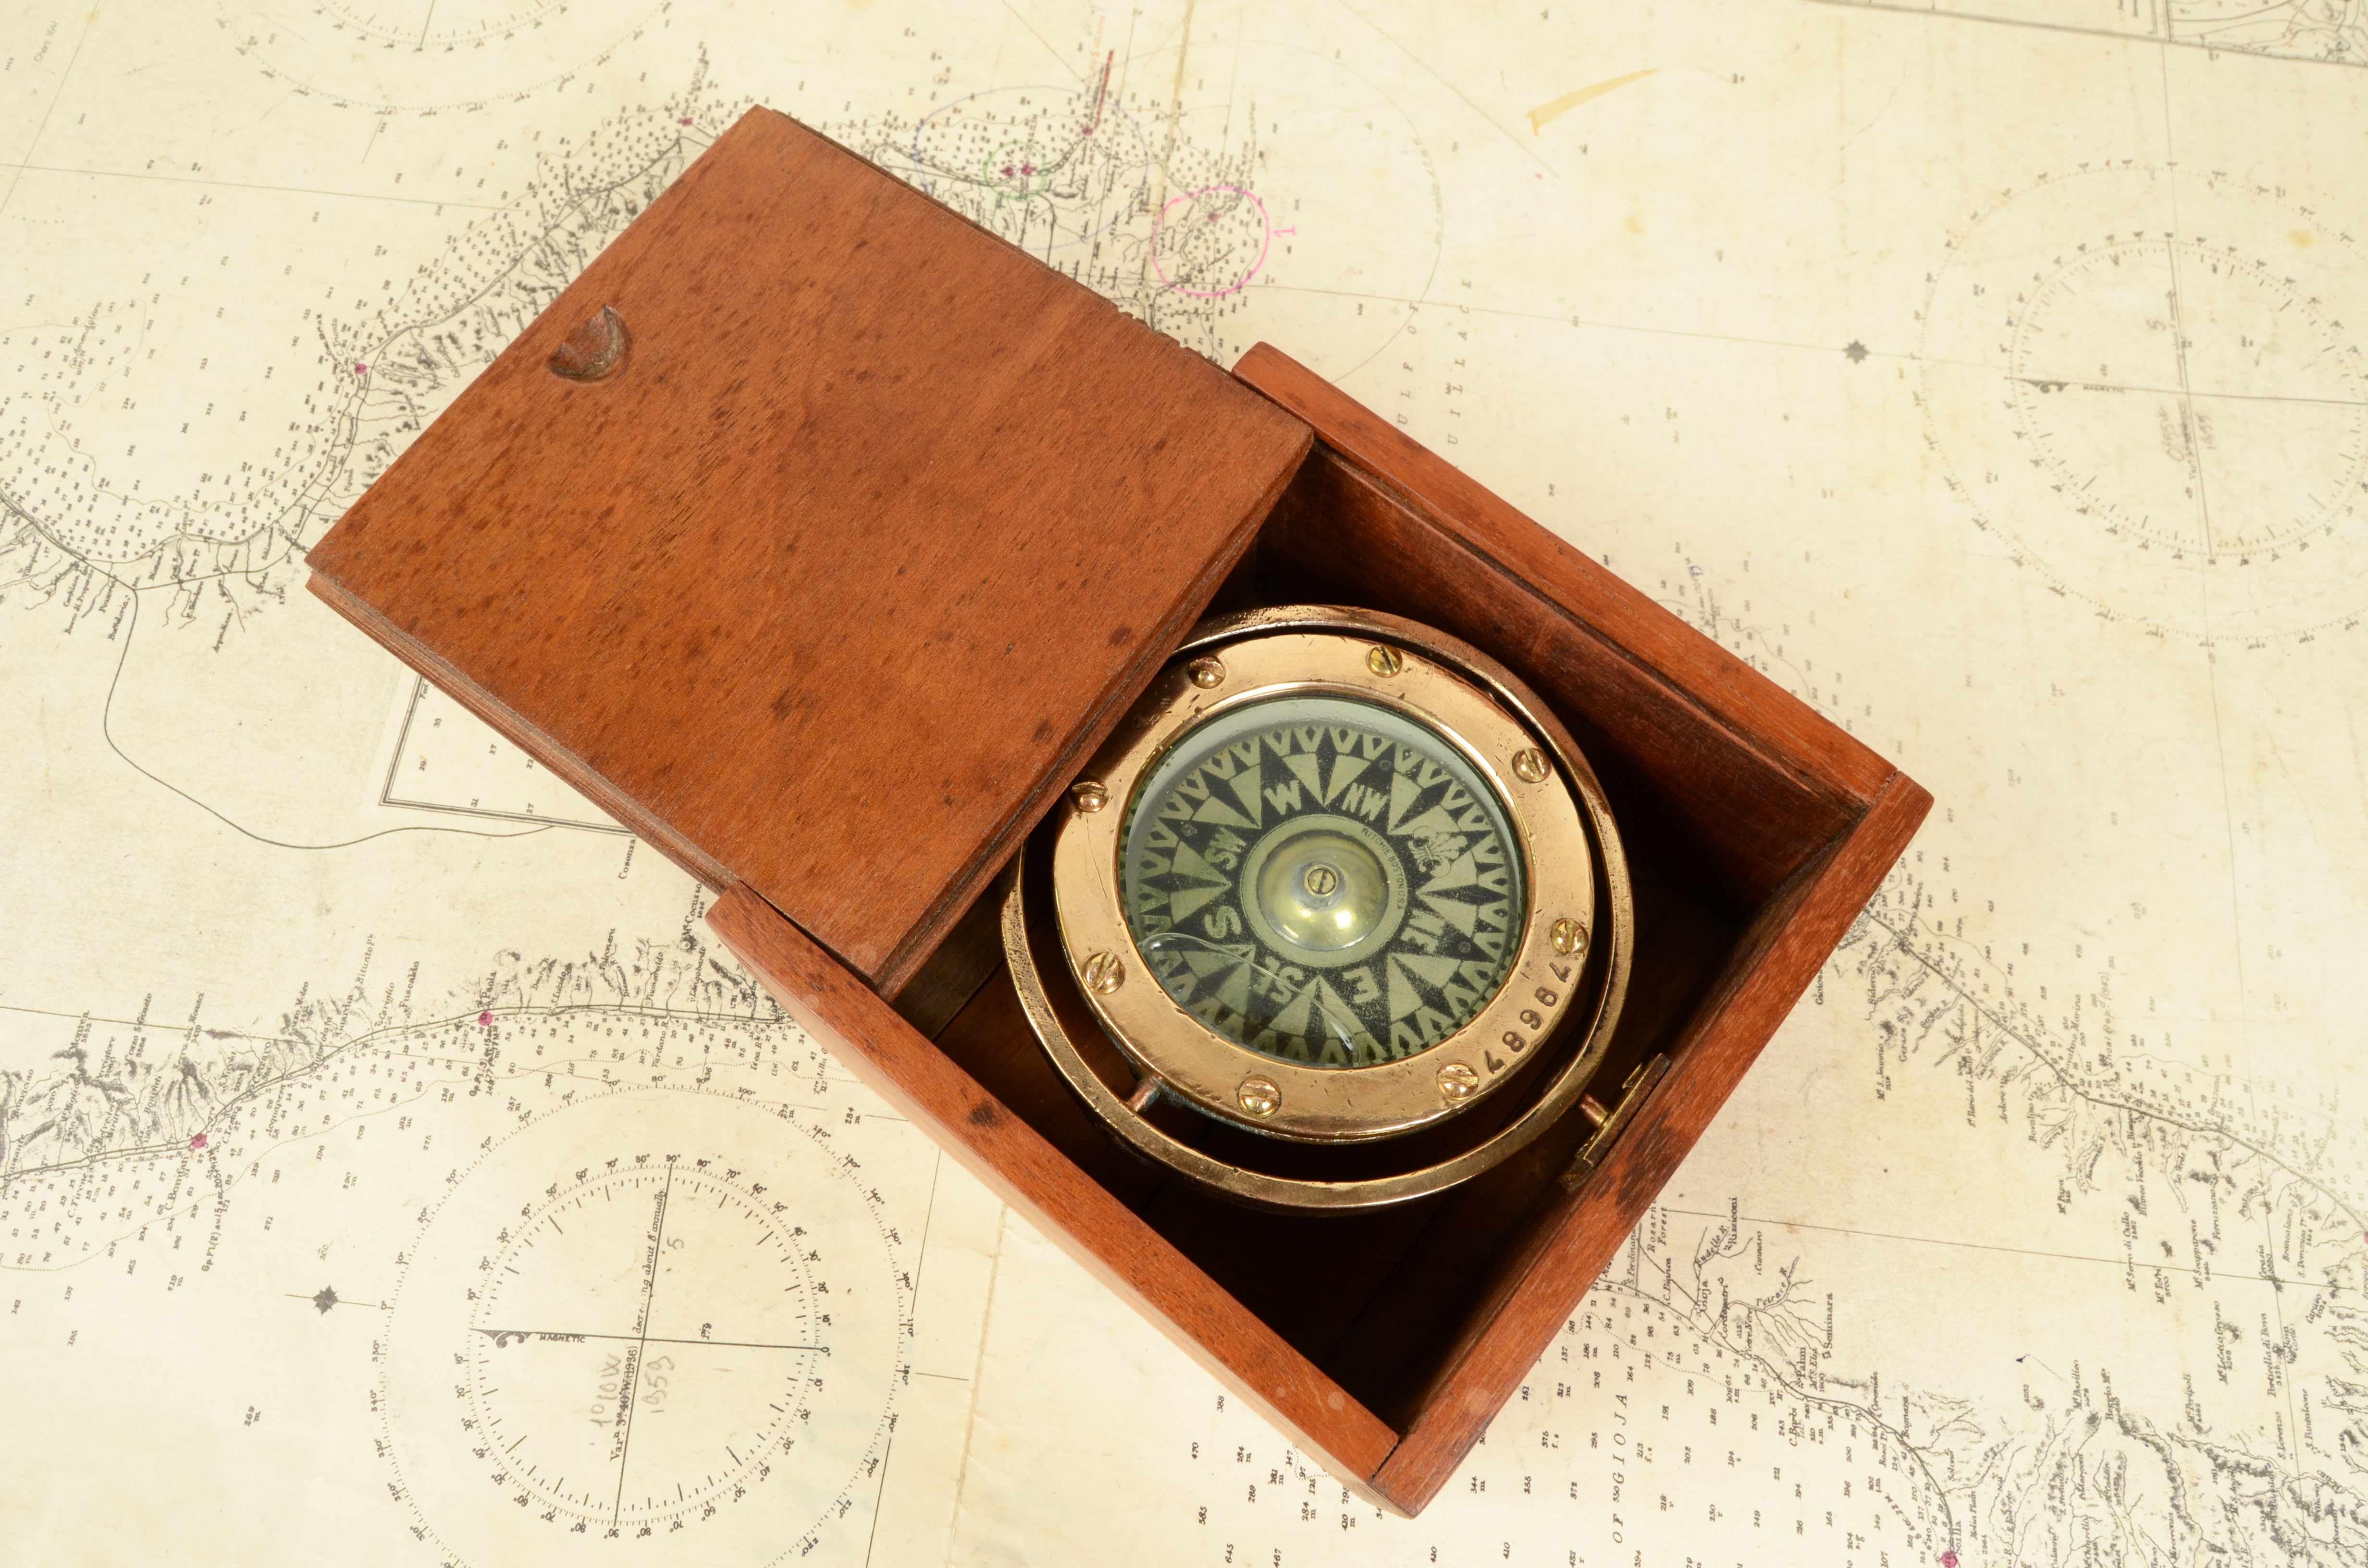 Liquid compass on cardan joint signed Ritchie Boston USA n. 79687 from the early 1900s, eight-wind rose complete with protractor circle and located in a oak wooden box with slit cover, compass card with 8 winds with goniometric circle. 
Good